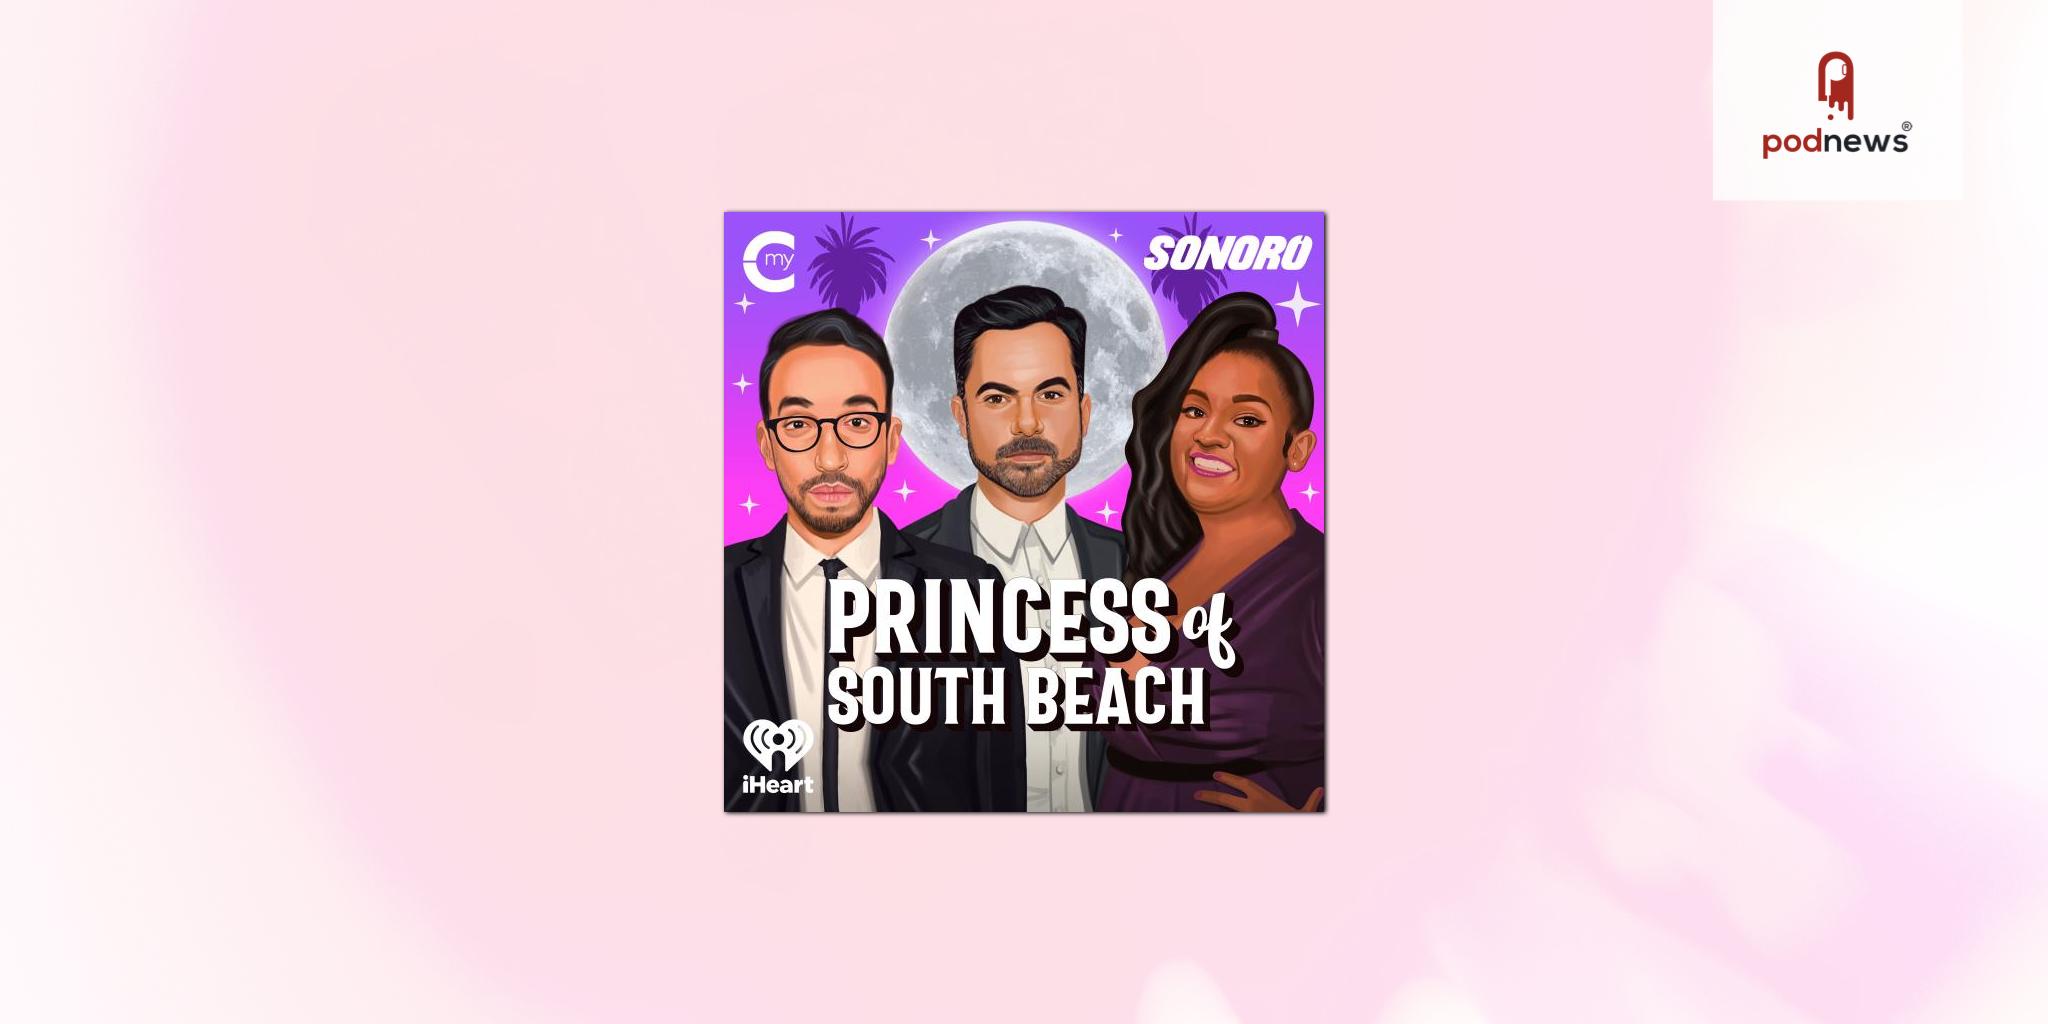 Sonoro and iHeartMedia Team Up to Launch New Slate of Eight Original My Cultura Podcasts